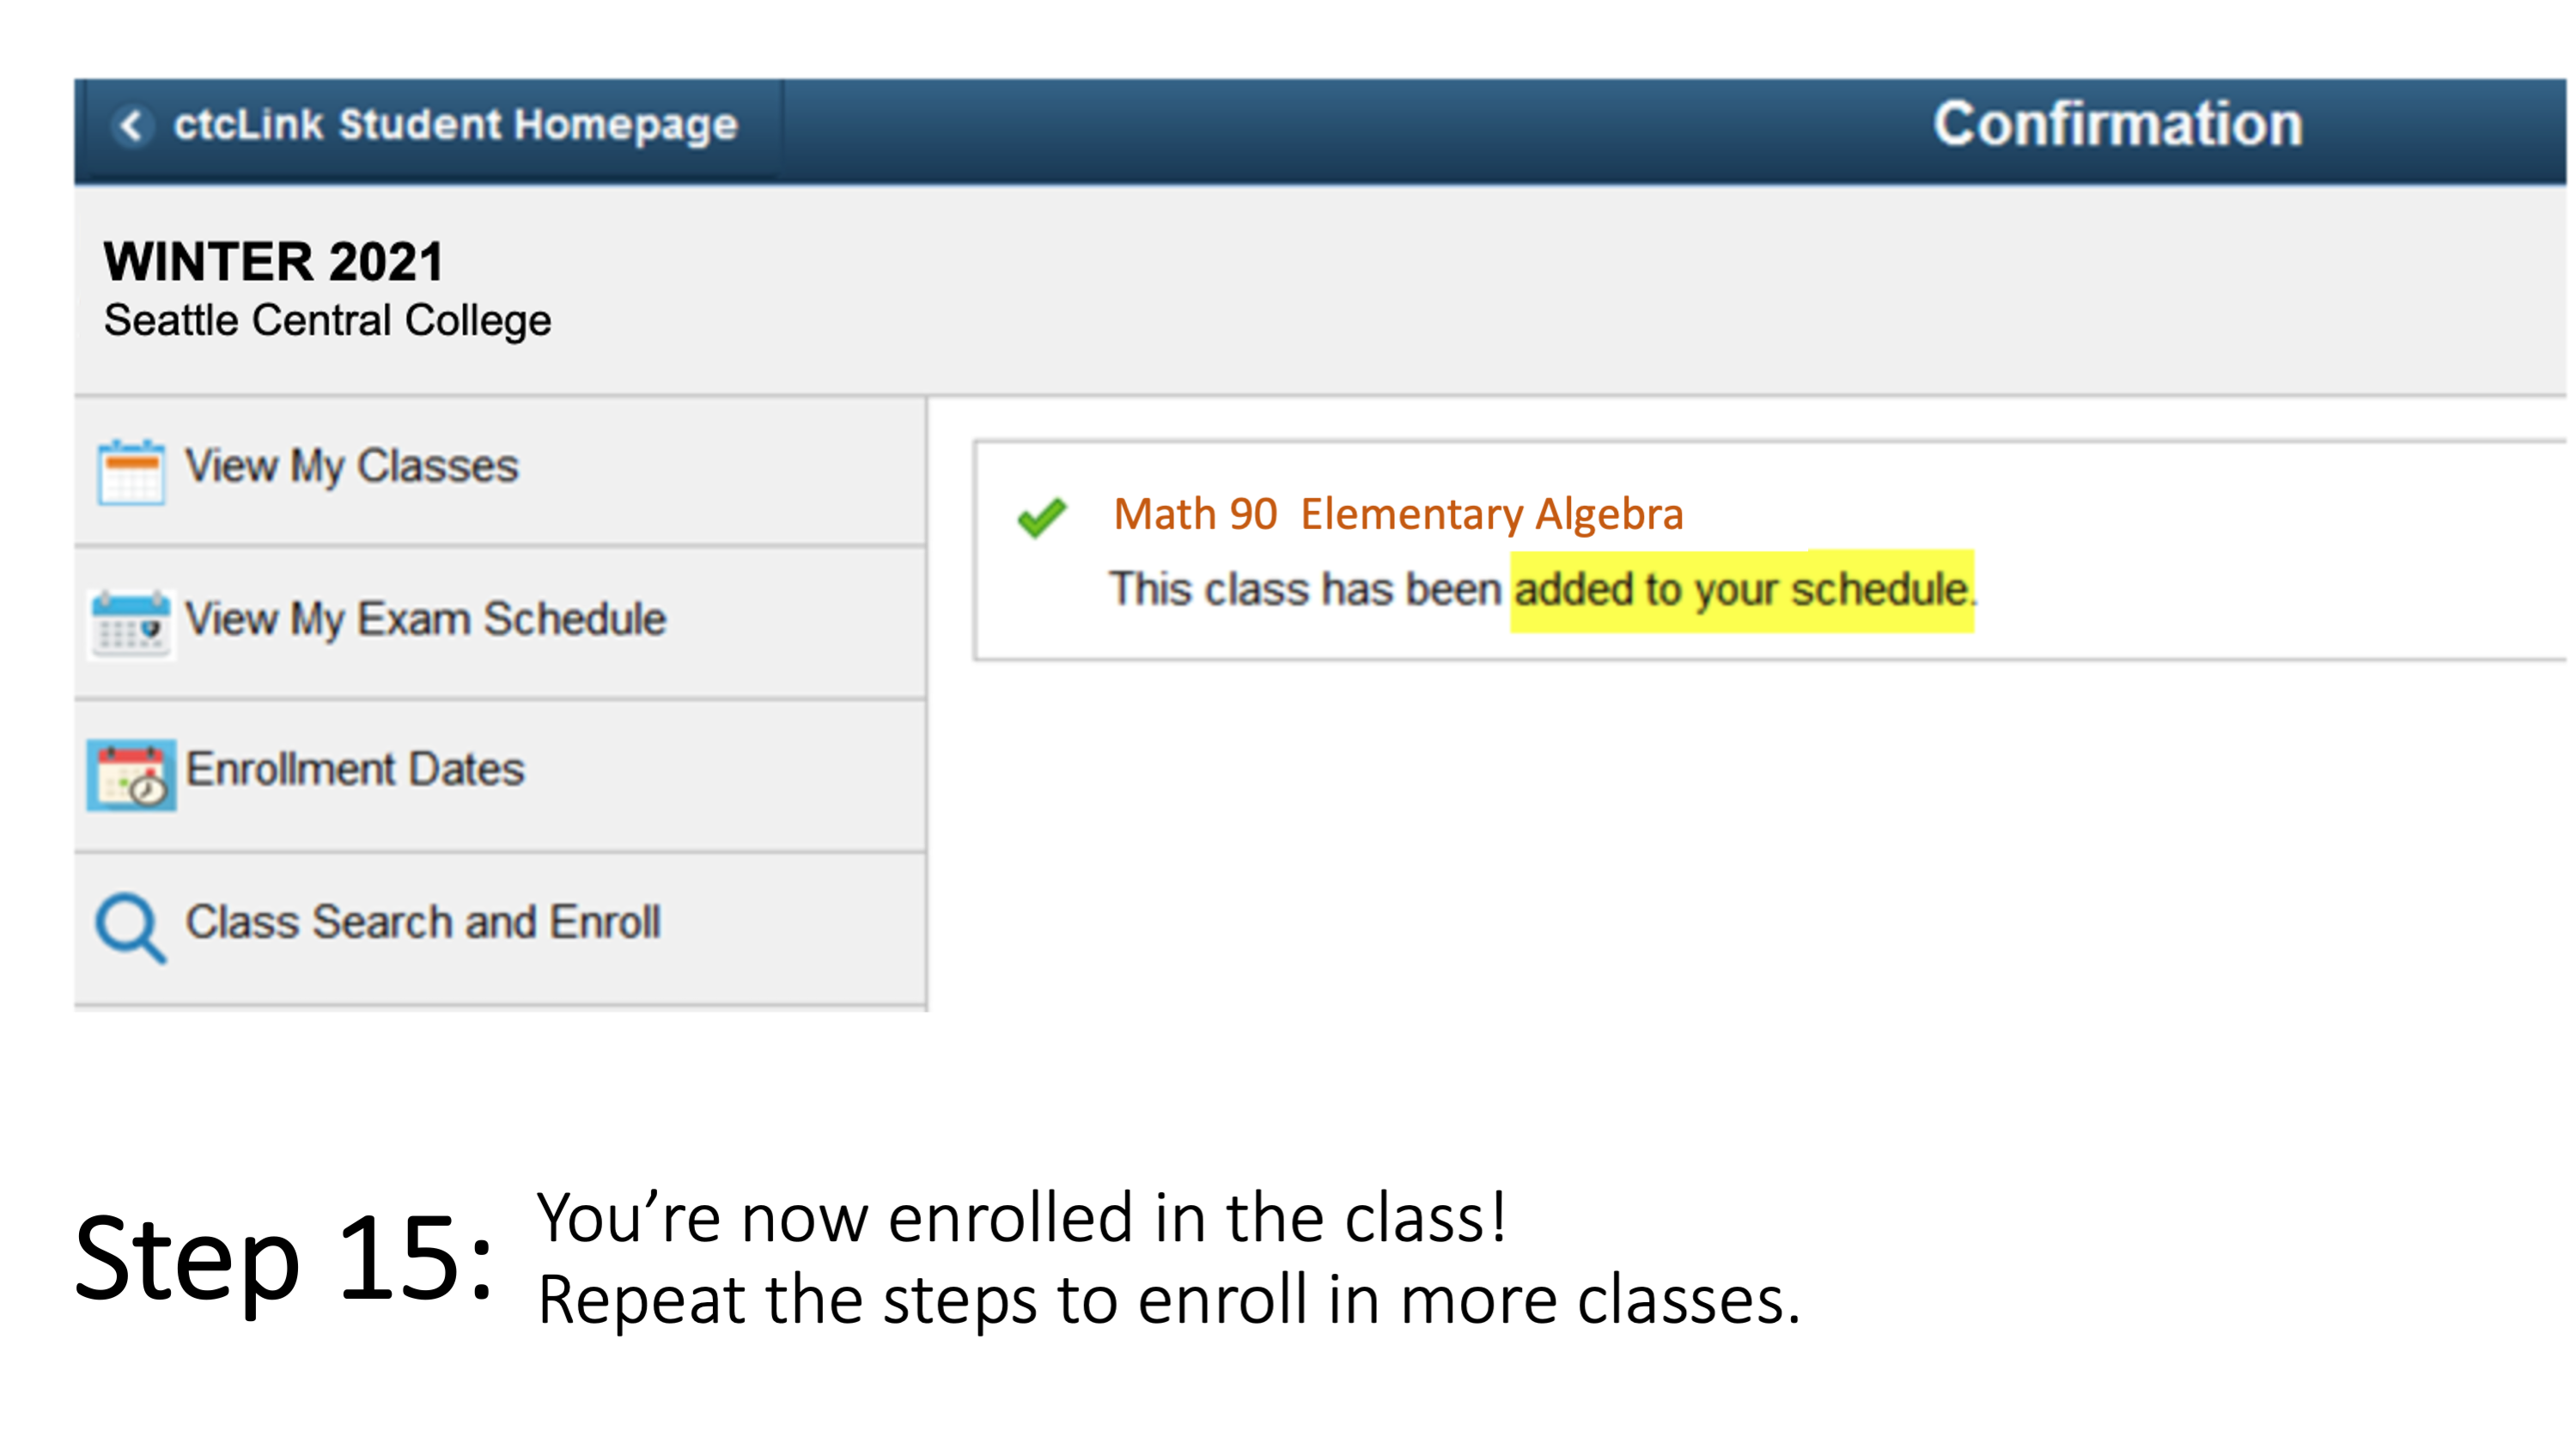 Step 15: You’re now enrolled in the class! Repeat the steps to enroll in more classes. 